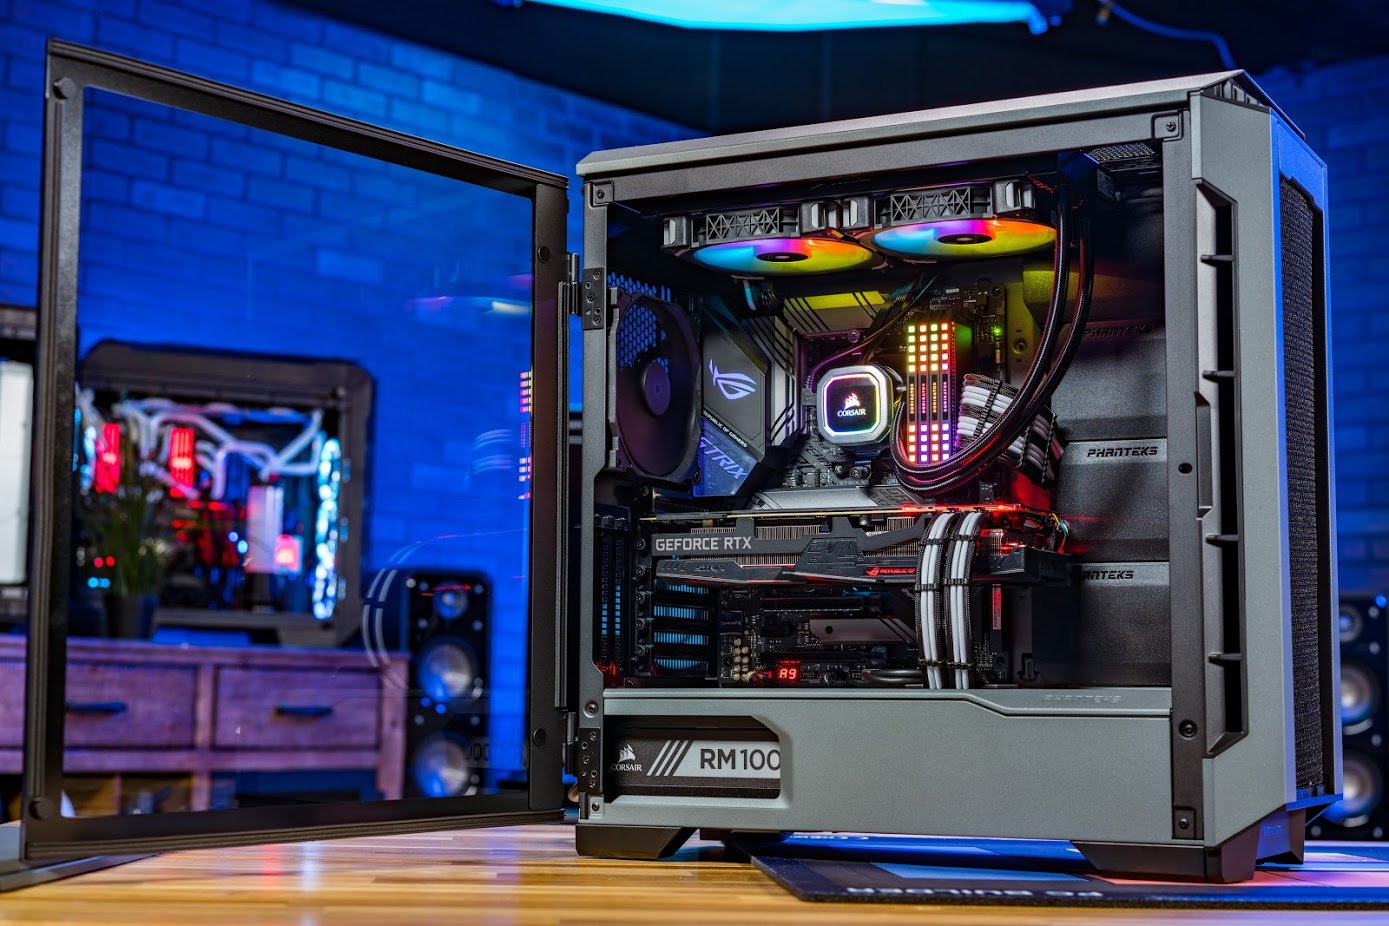 What should you put in your gaming PC?